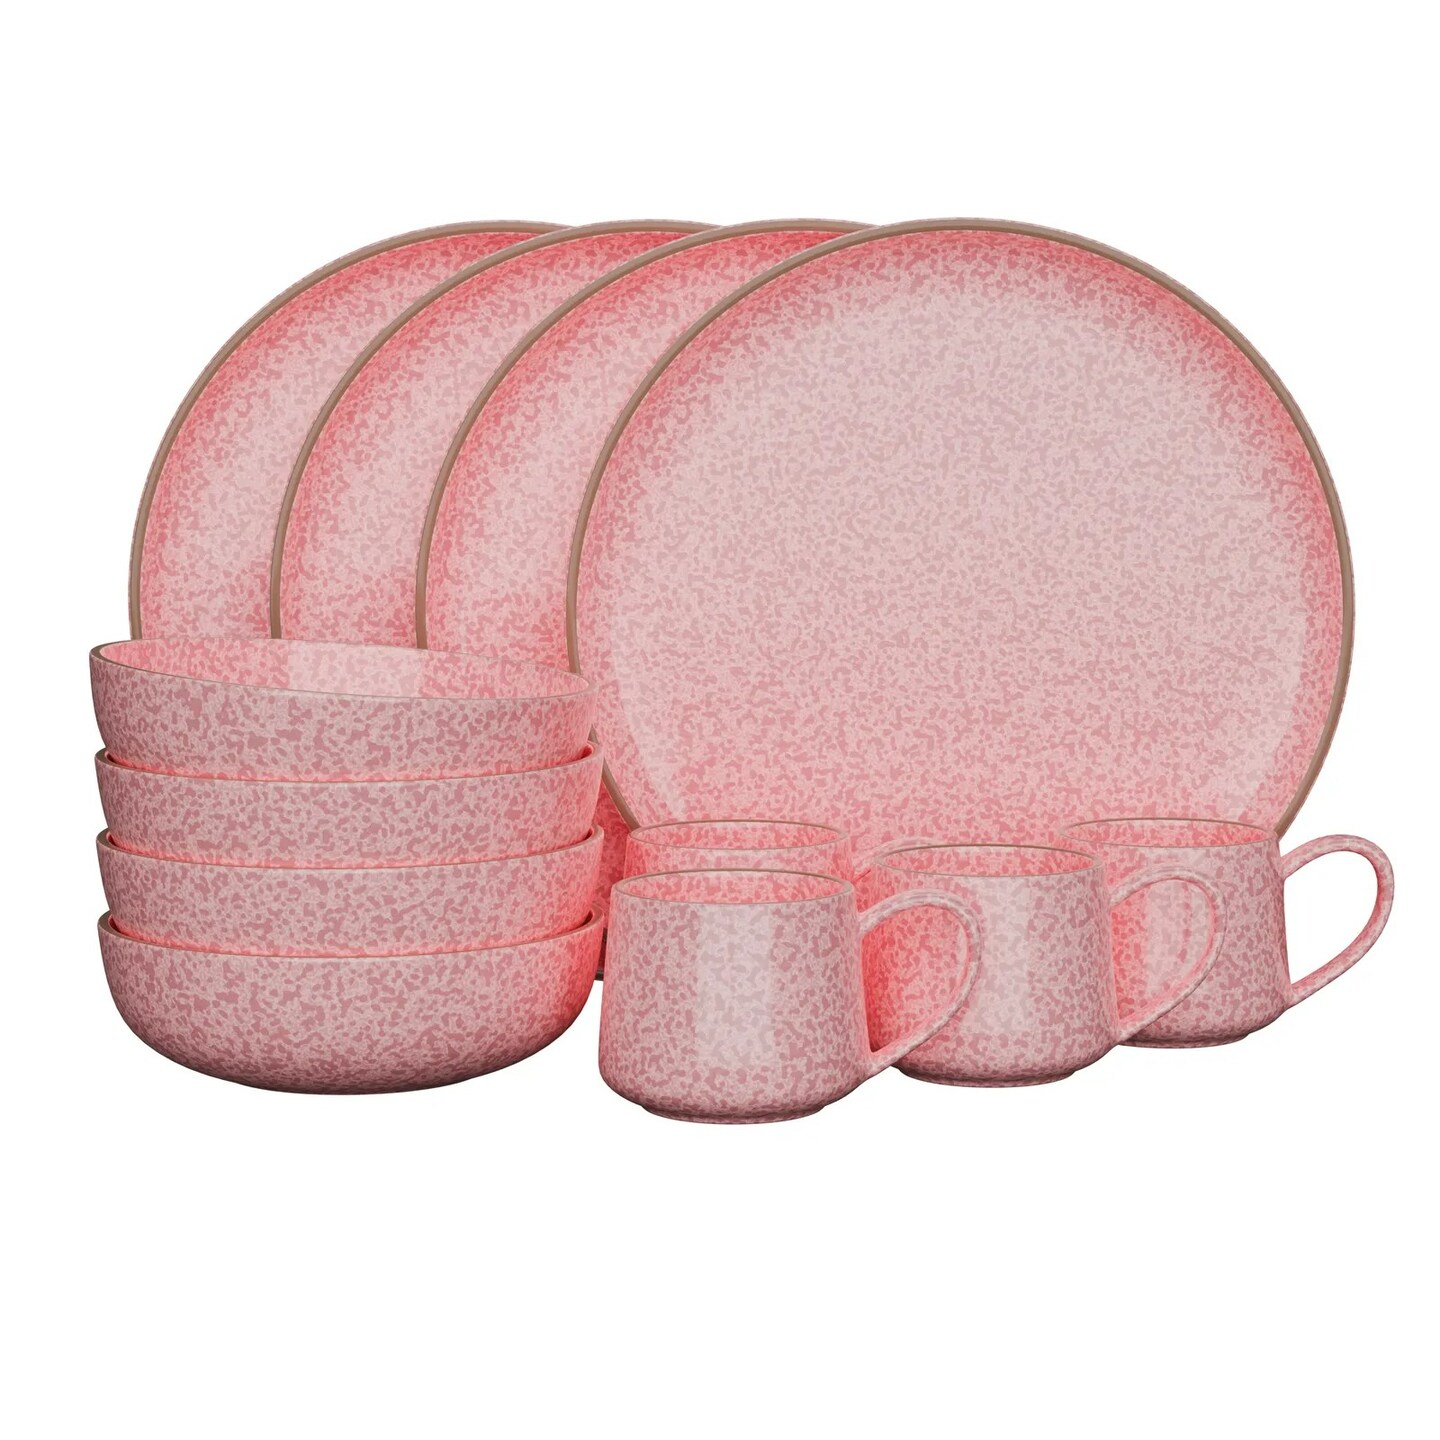 American Atelier 12 Pc Dinnerware Set, Stoneware Dishes, Service for 4 Rose Pink